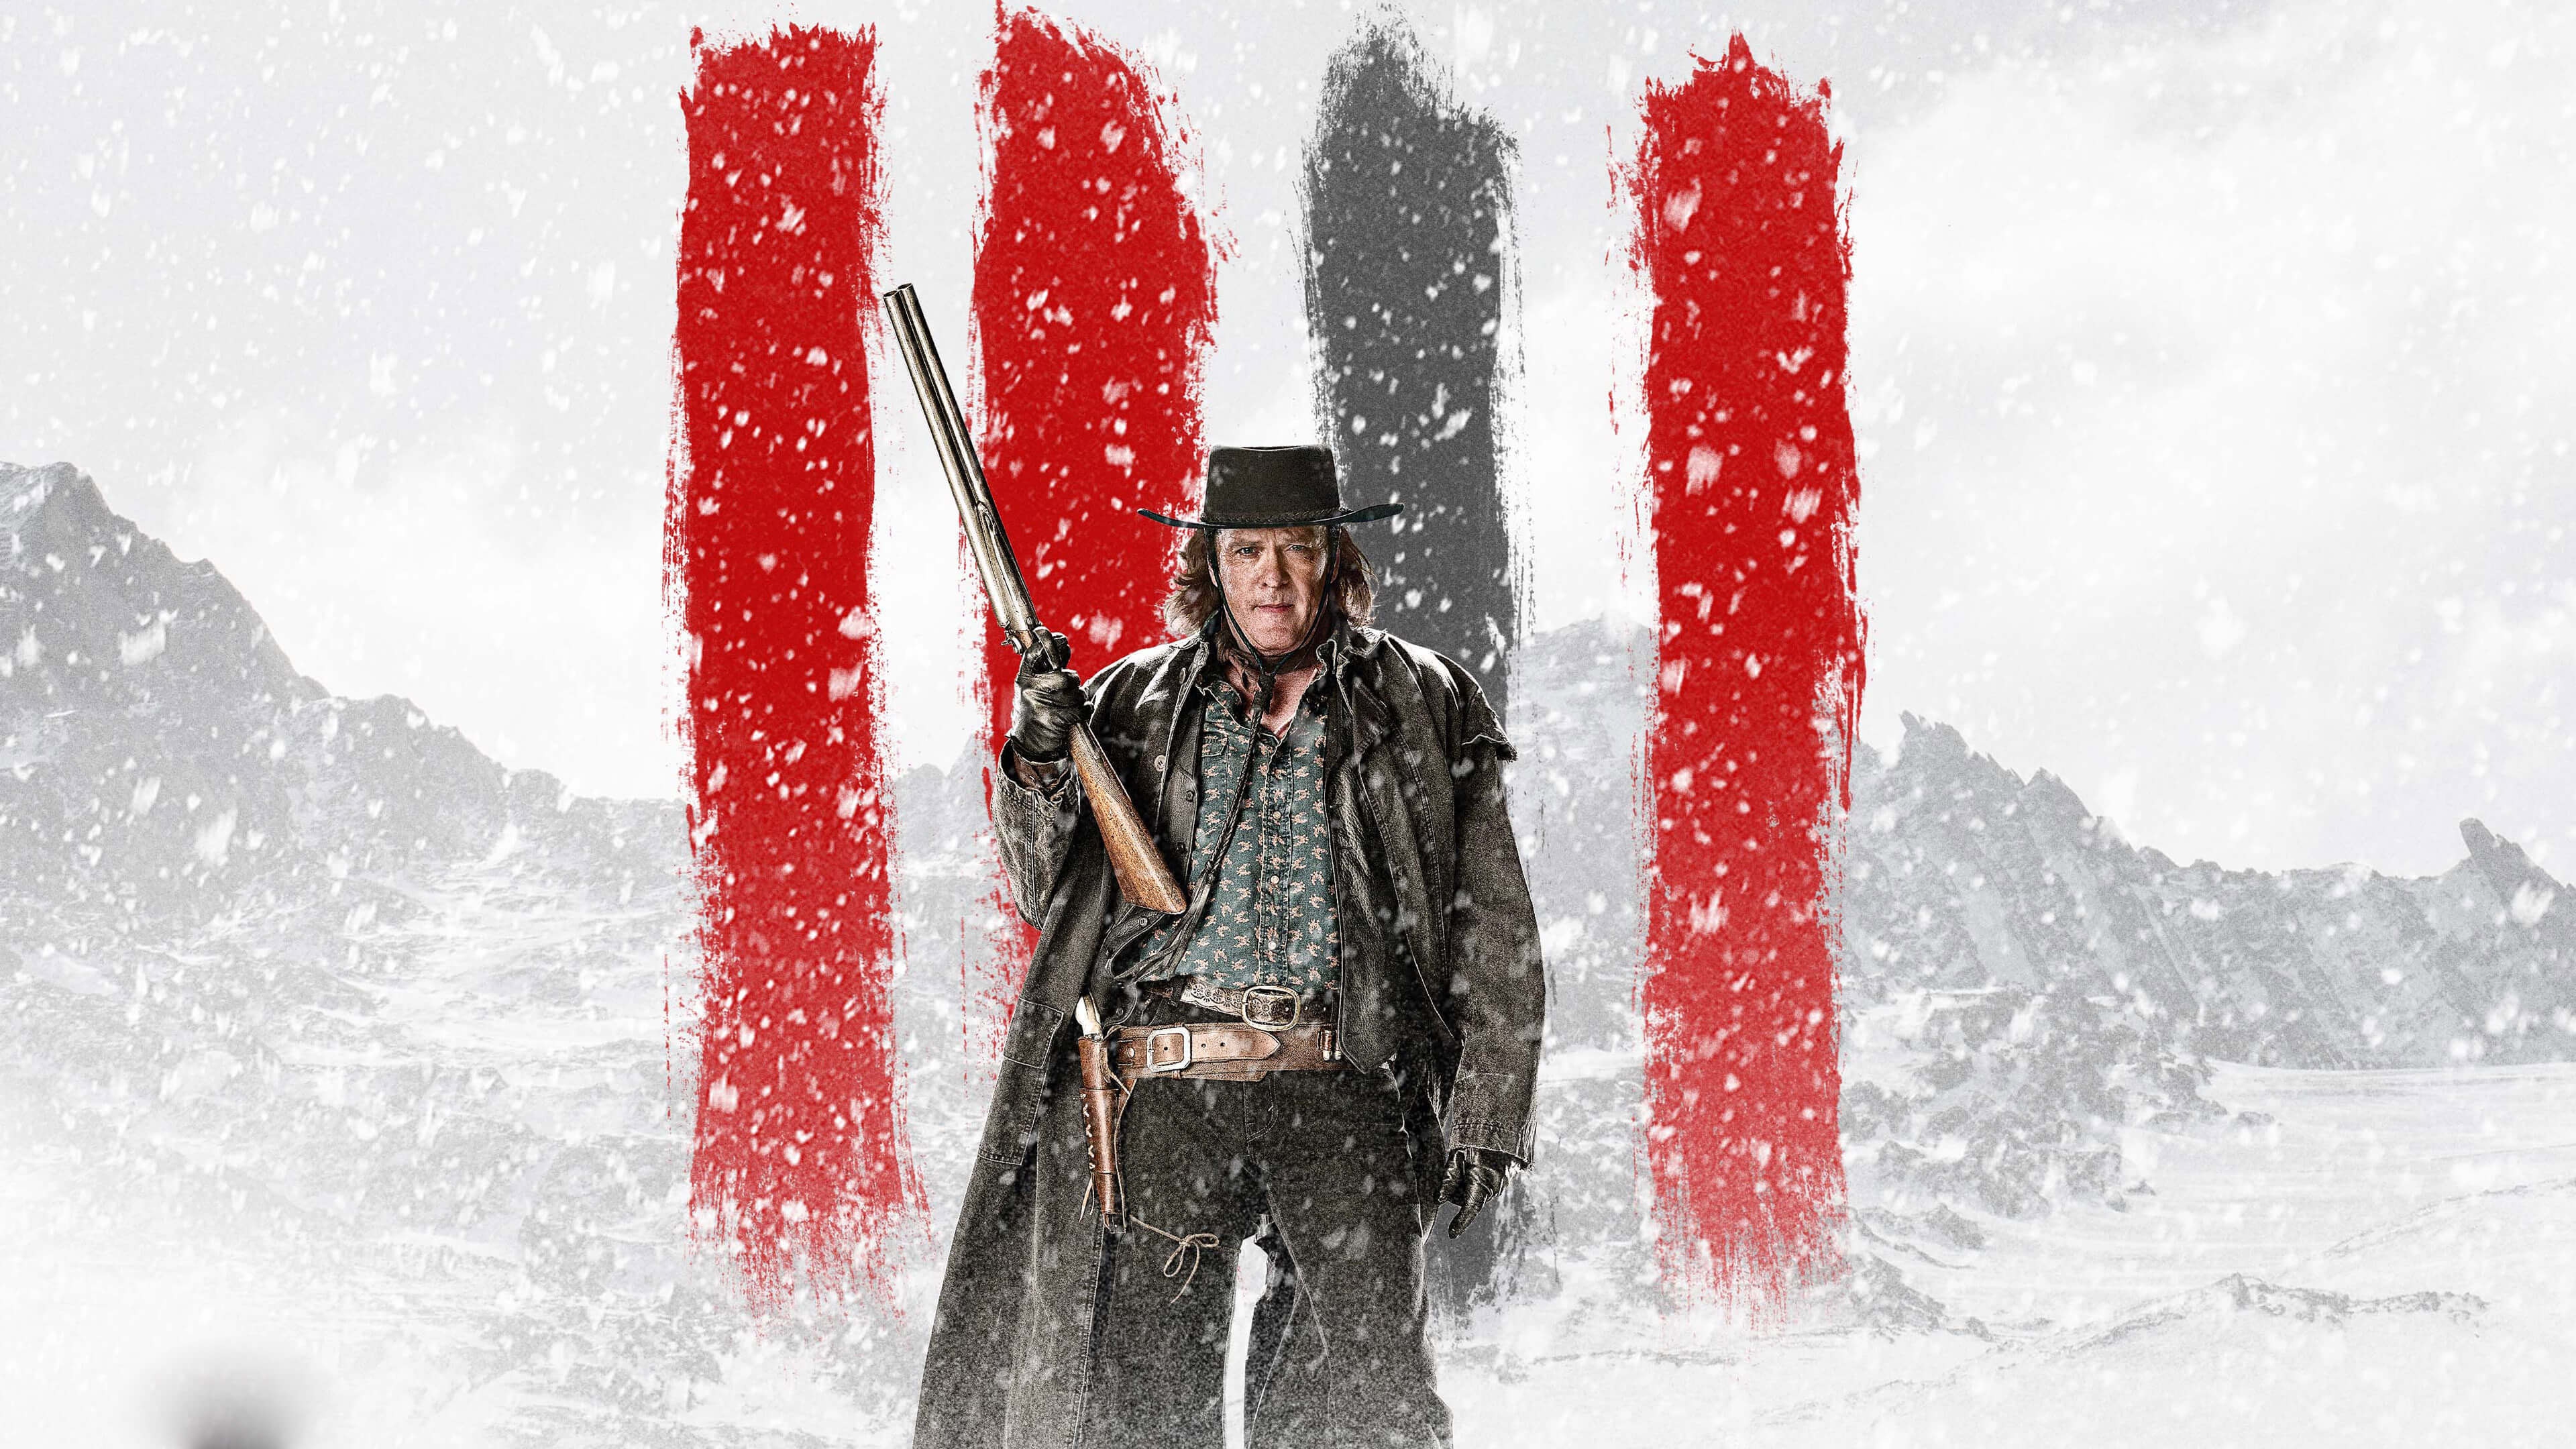 The Hateful Eight Michael Madsen for 3840 x 2160 Ultra HD resolution